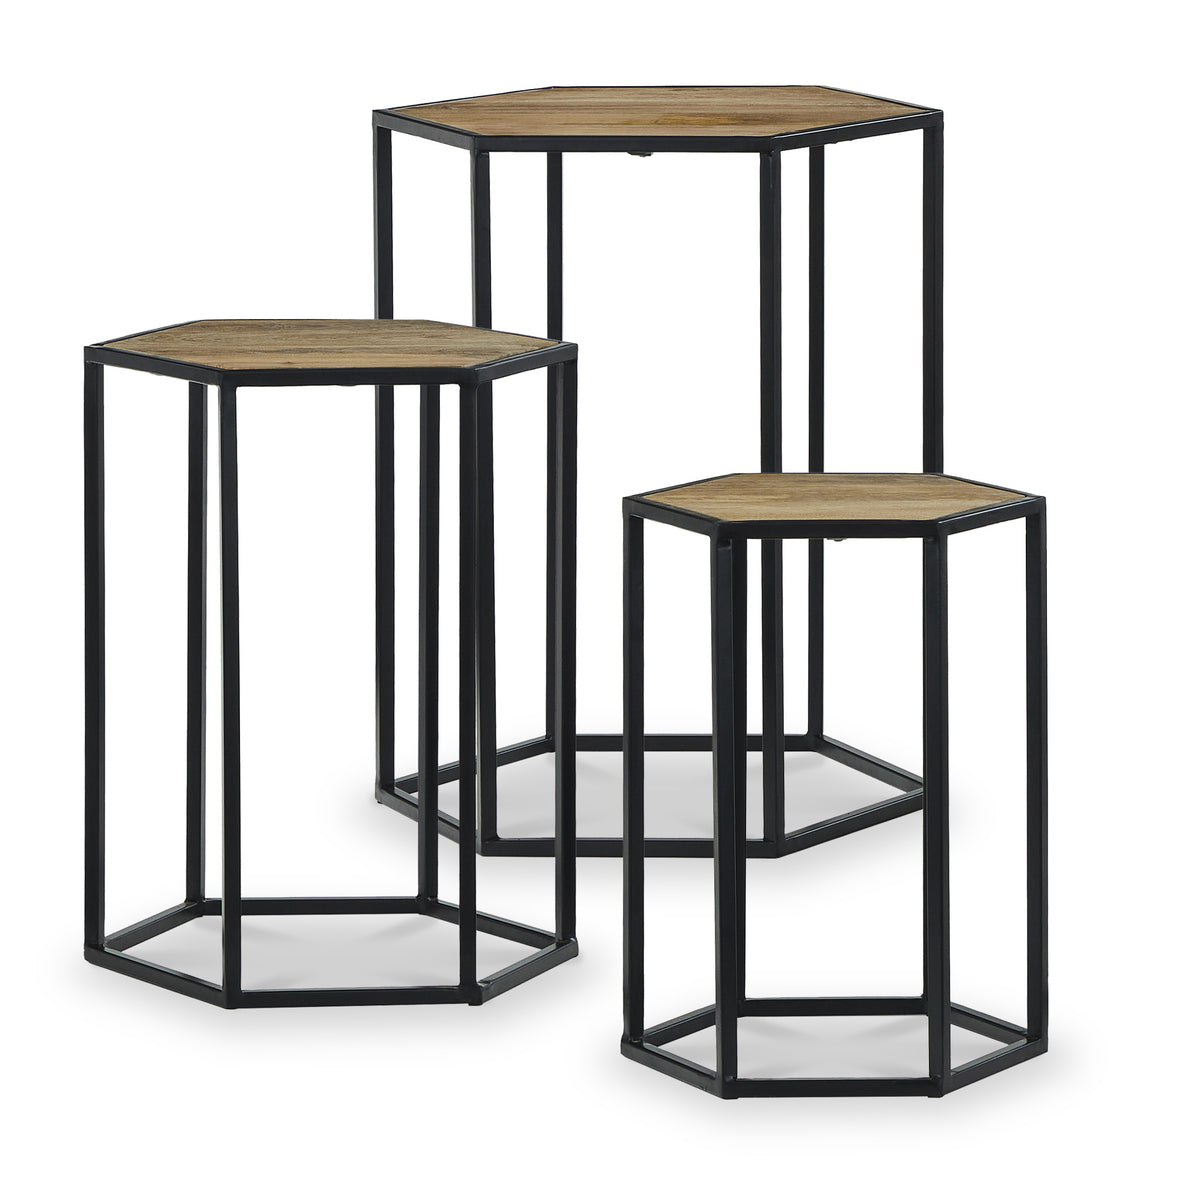 Hexi Nest of Tables